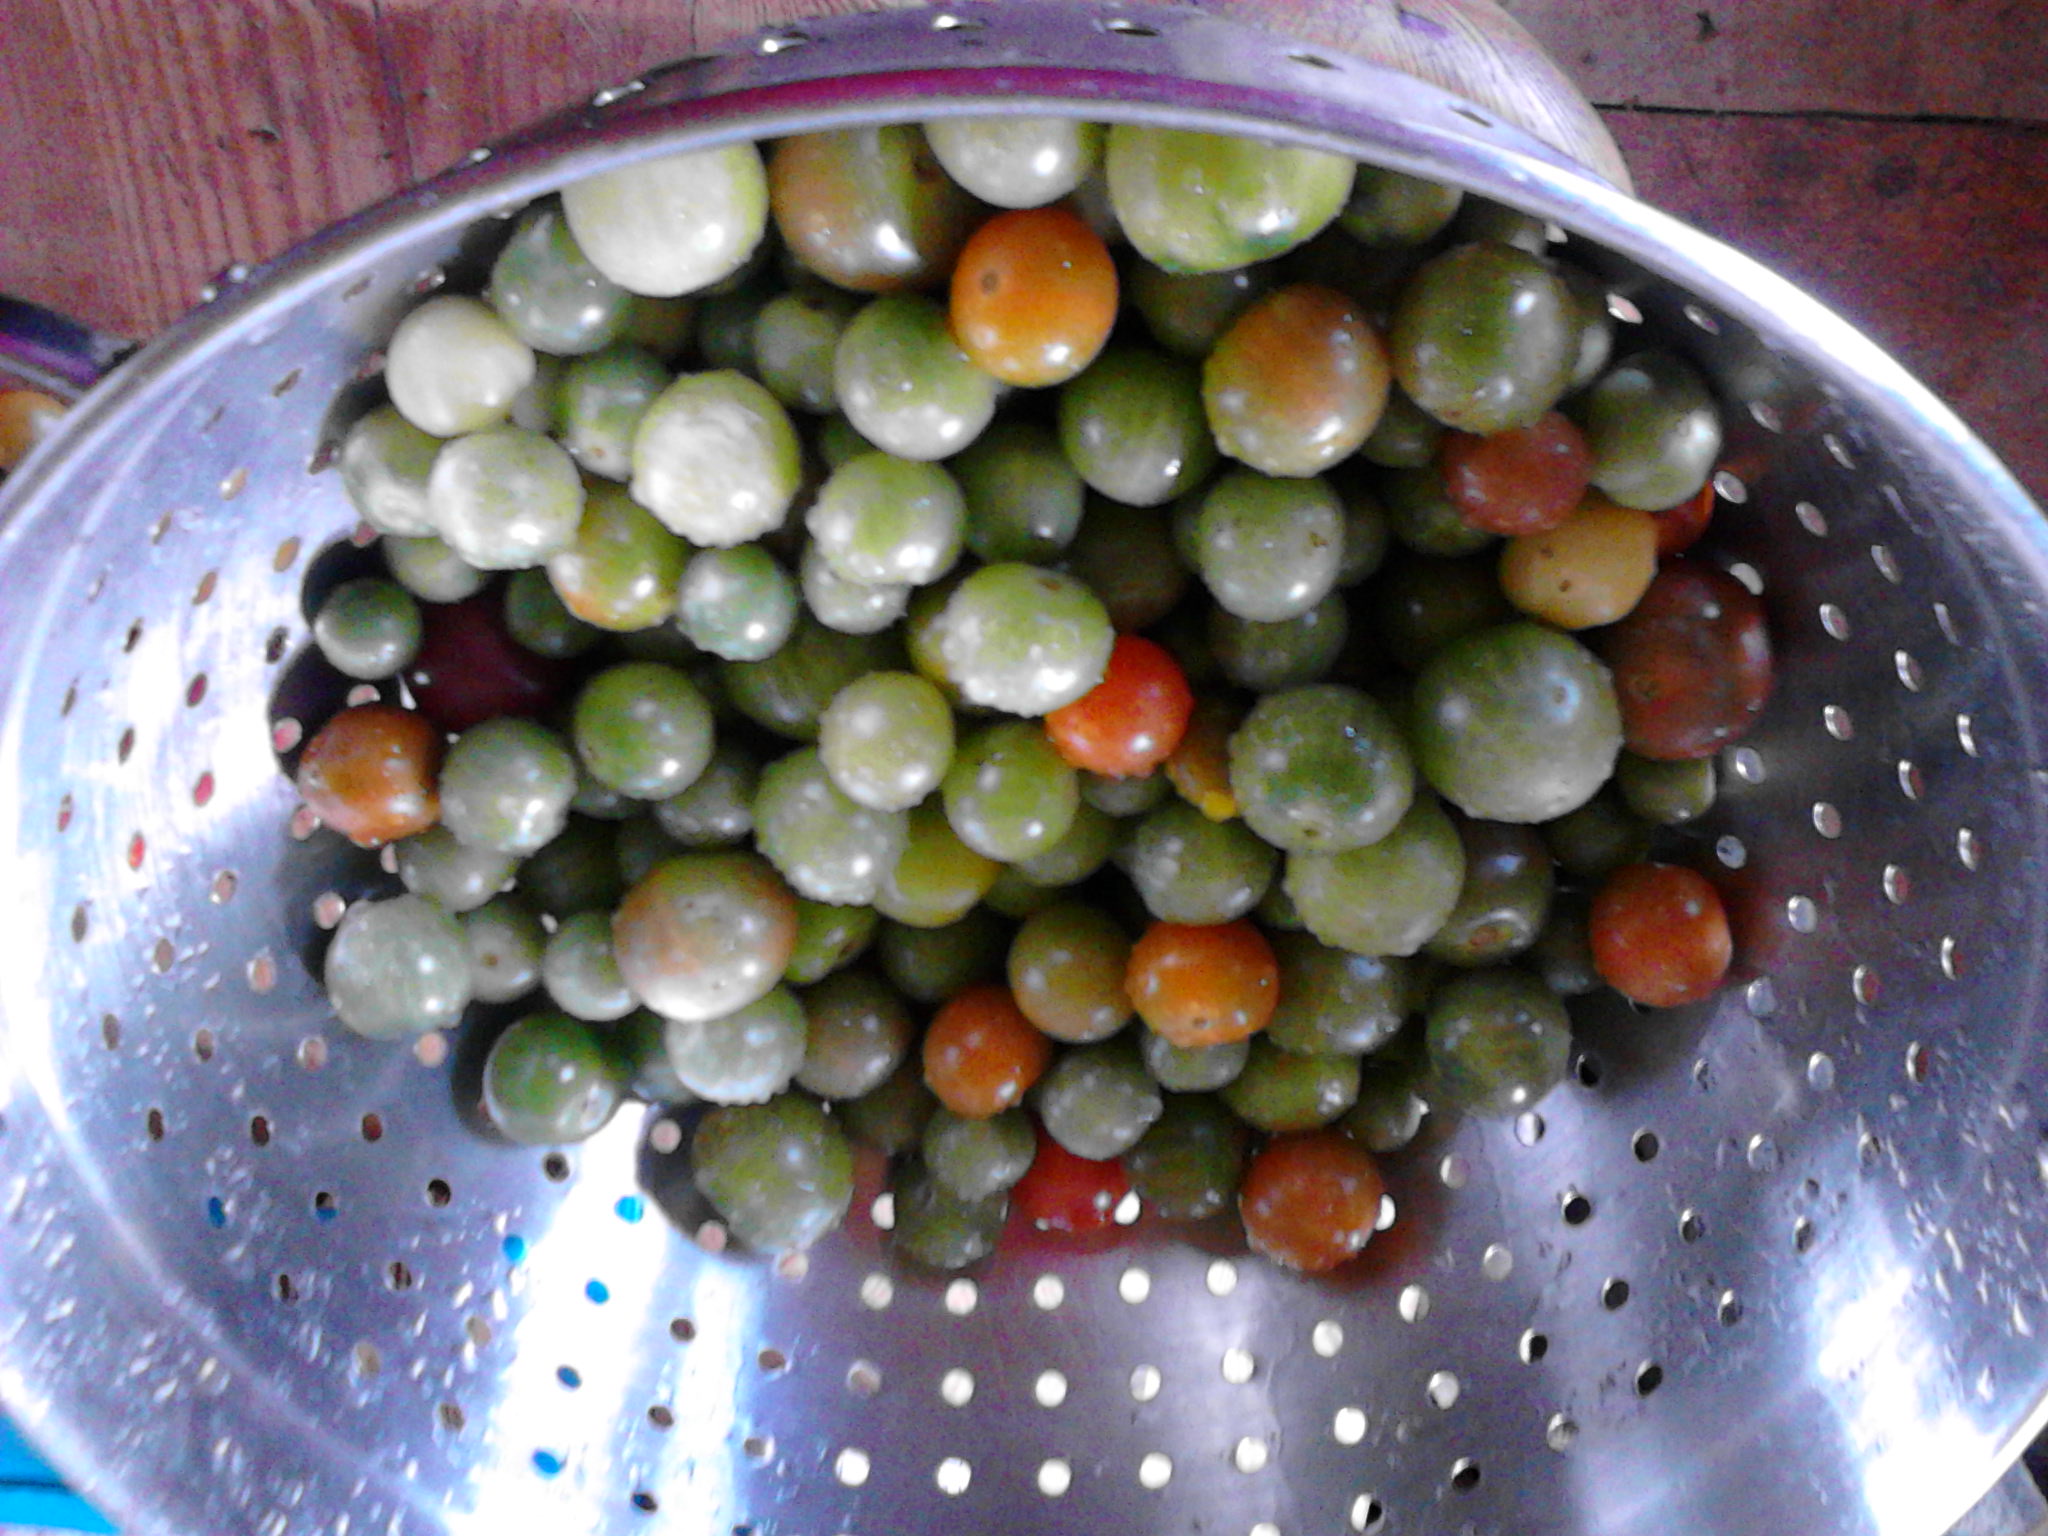 2lb of cherry tomatoes for making lacto-fermented green tomato and hot pepper pickle